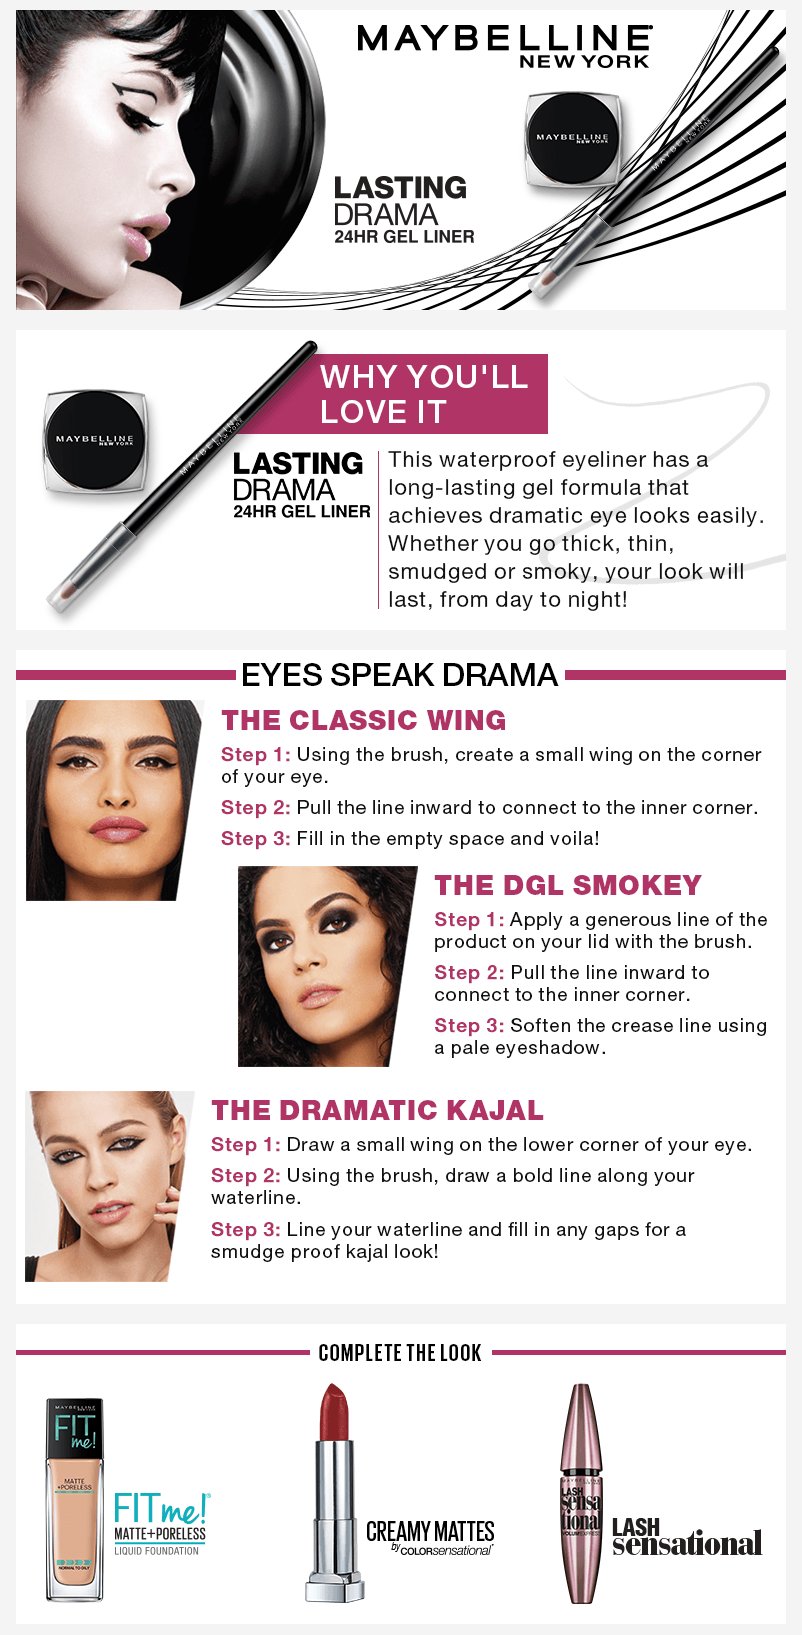 Maybelline Lasting Drama Gel Liner - Uses, Features, How To Apply